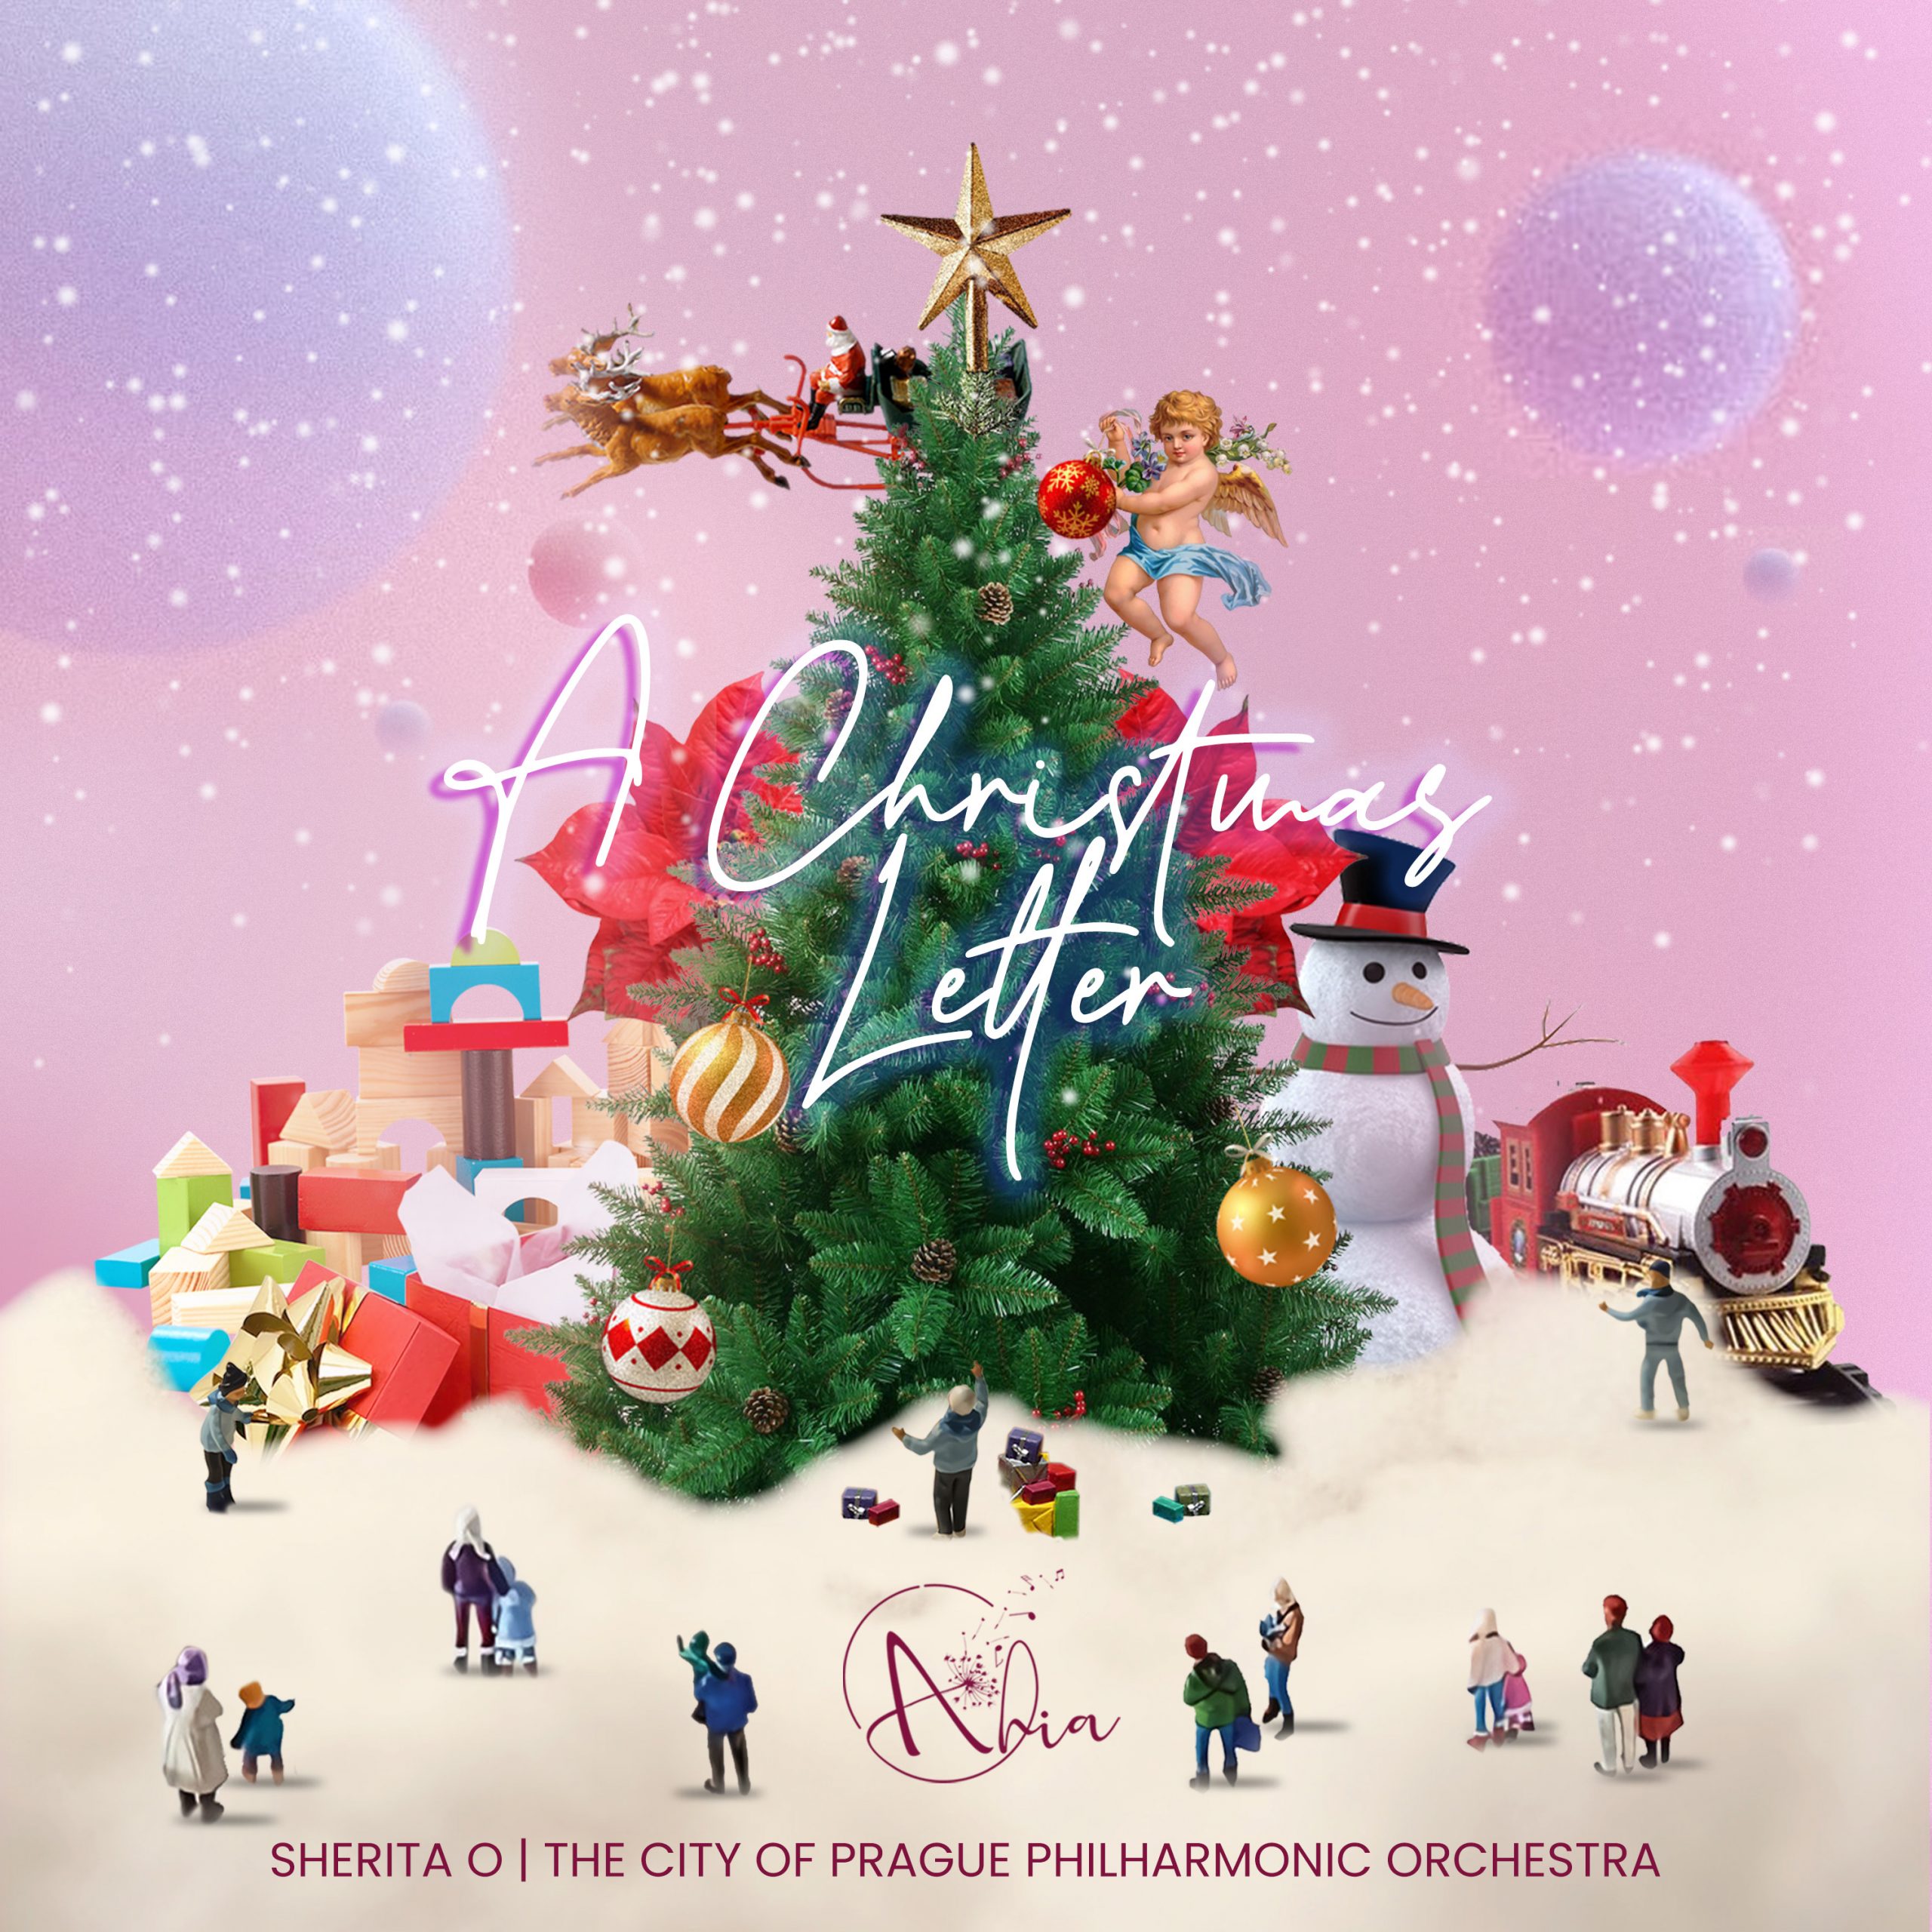 The new single ‘A Christmas Letter’ from ‘Aria’ with its big and anthemic chorus, stylish and pure vocals is on the playlist now.